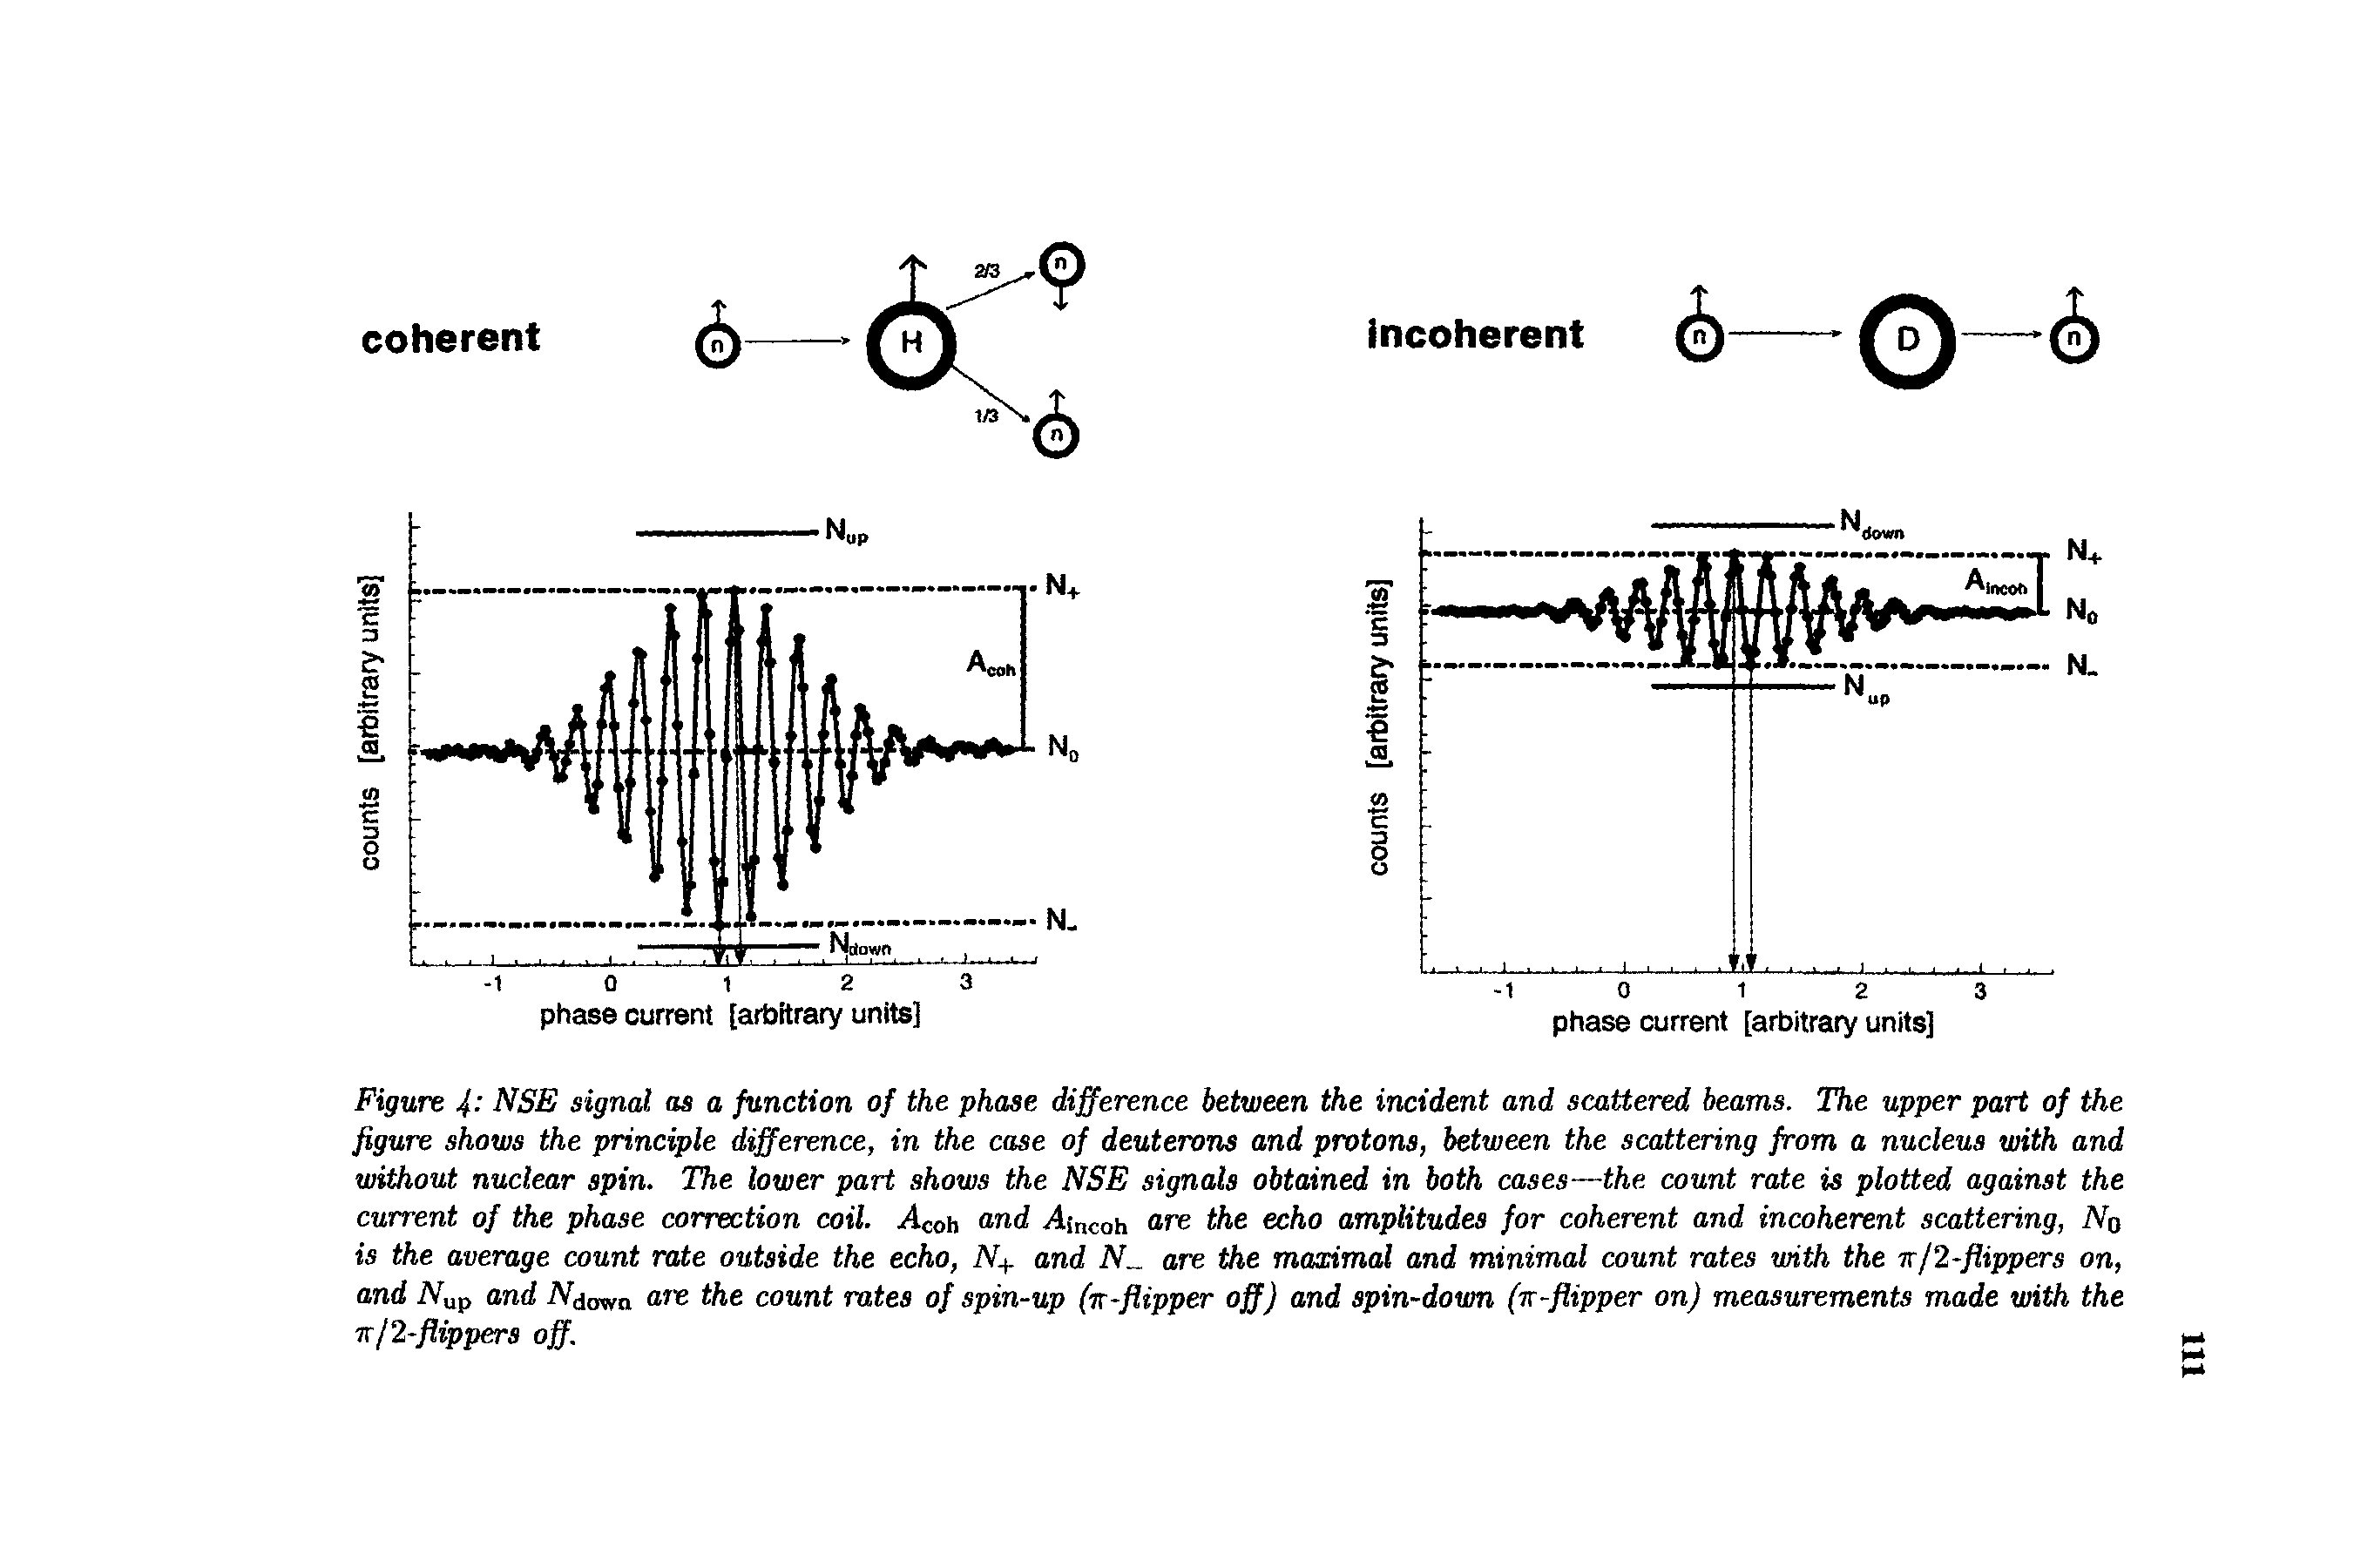 Figure 4- SE signal as a function of the phase difference between the incident and scattered beams. The upper part of the figure shows the principle difference, in the case of deuterons and protons, between the scattering from a nucleus with and without nuclear spin. The lower part shows the NSE signals obtained in both cases—the count rate is plotted against the current of the phase correction coil. Acob und vdincoh ore the echo amplitudes for coherent and incoherent scattering, No is the average count rate outside the echo, N+ and iV are the maximal and minimal count rates with the ir/2-flippers on, and Nap and iVdown are the count rates of spin-up (rr-flipper off) and spin-down (ir-flipper on) measurements made with the nl2-flippers off.